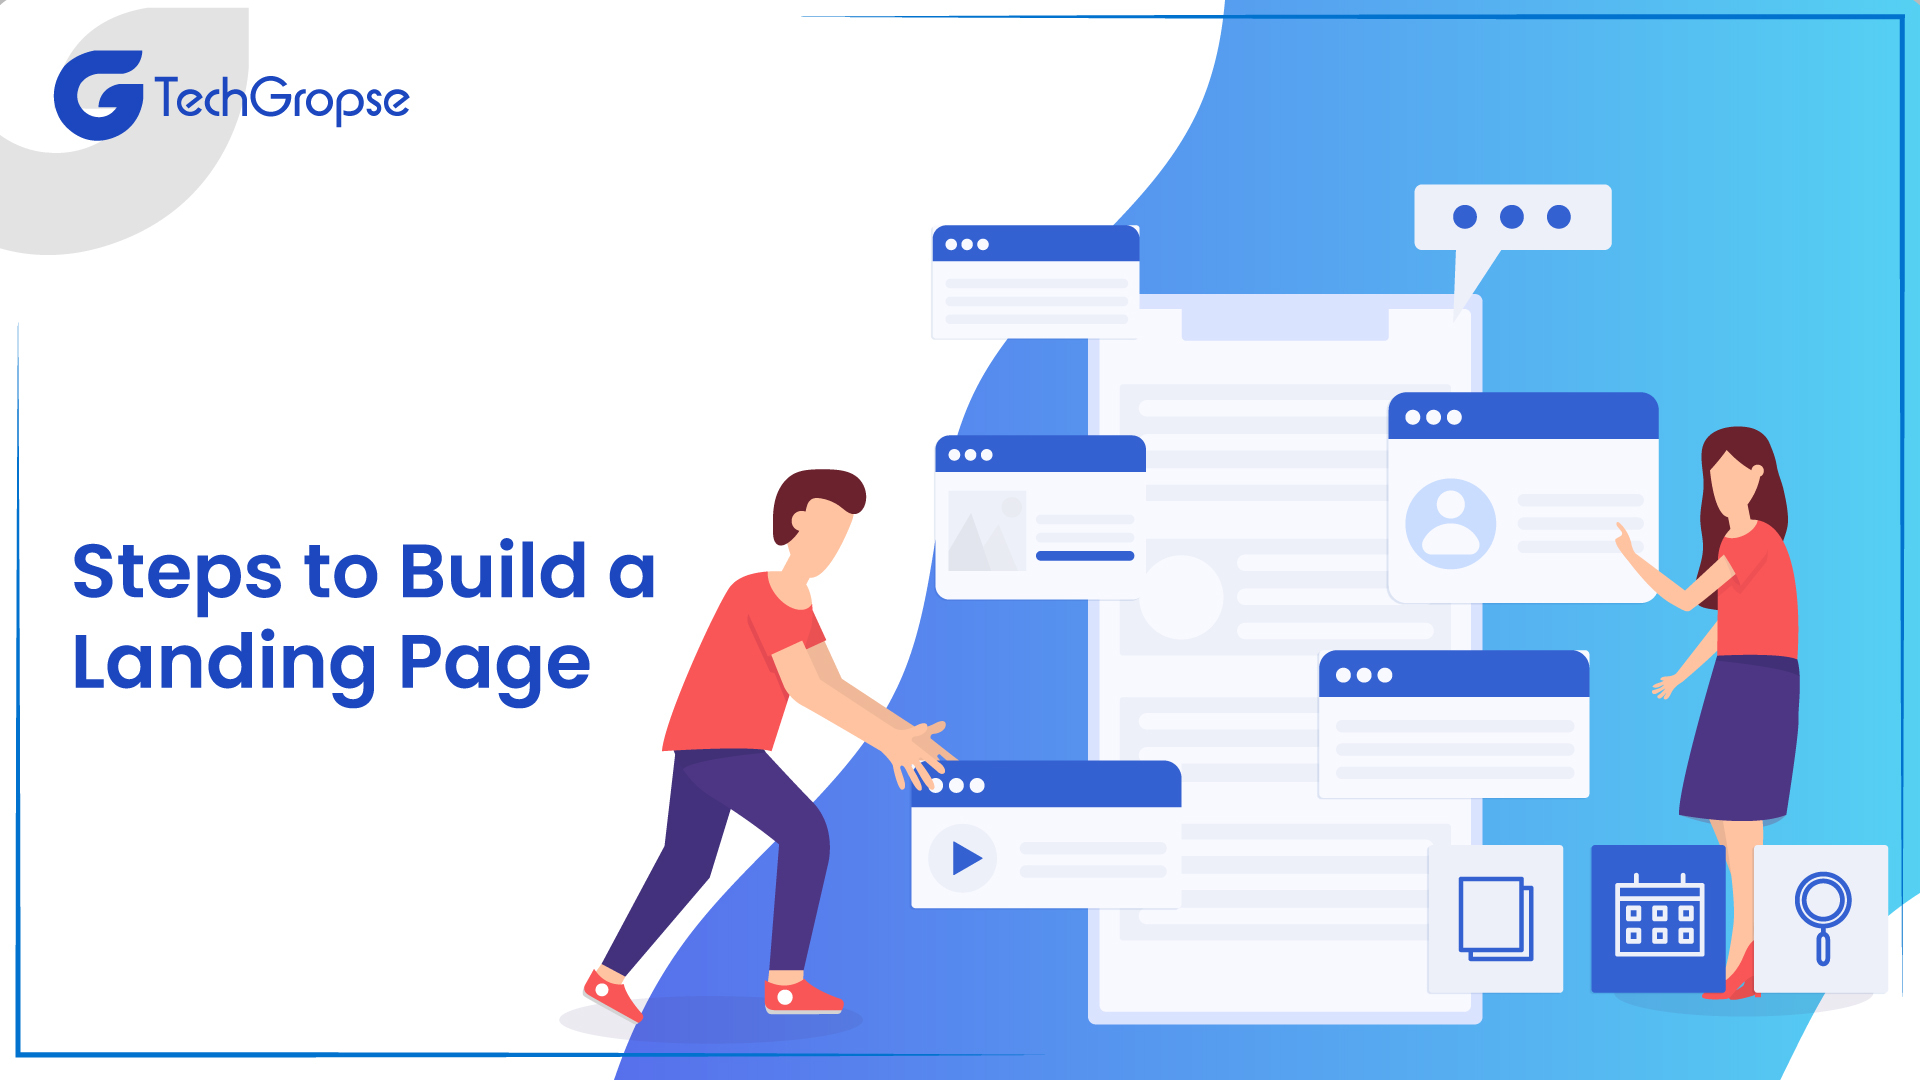 Steps to Build a Landing Page